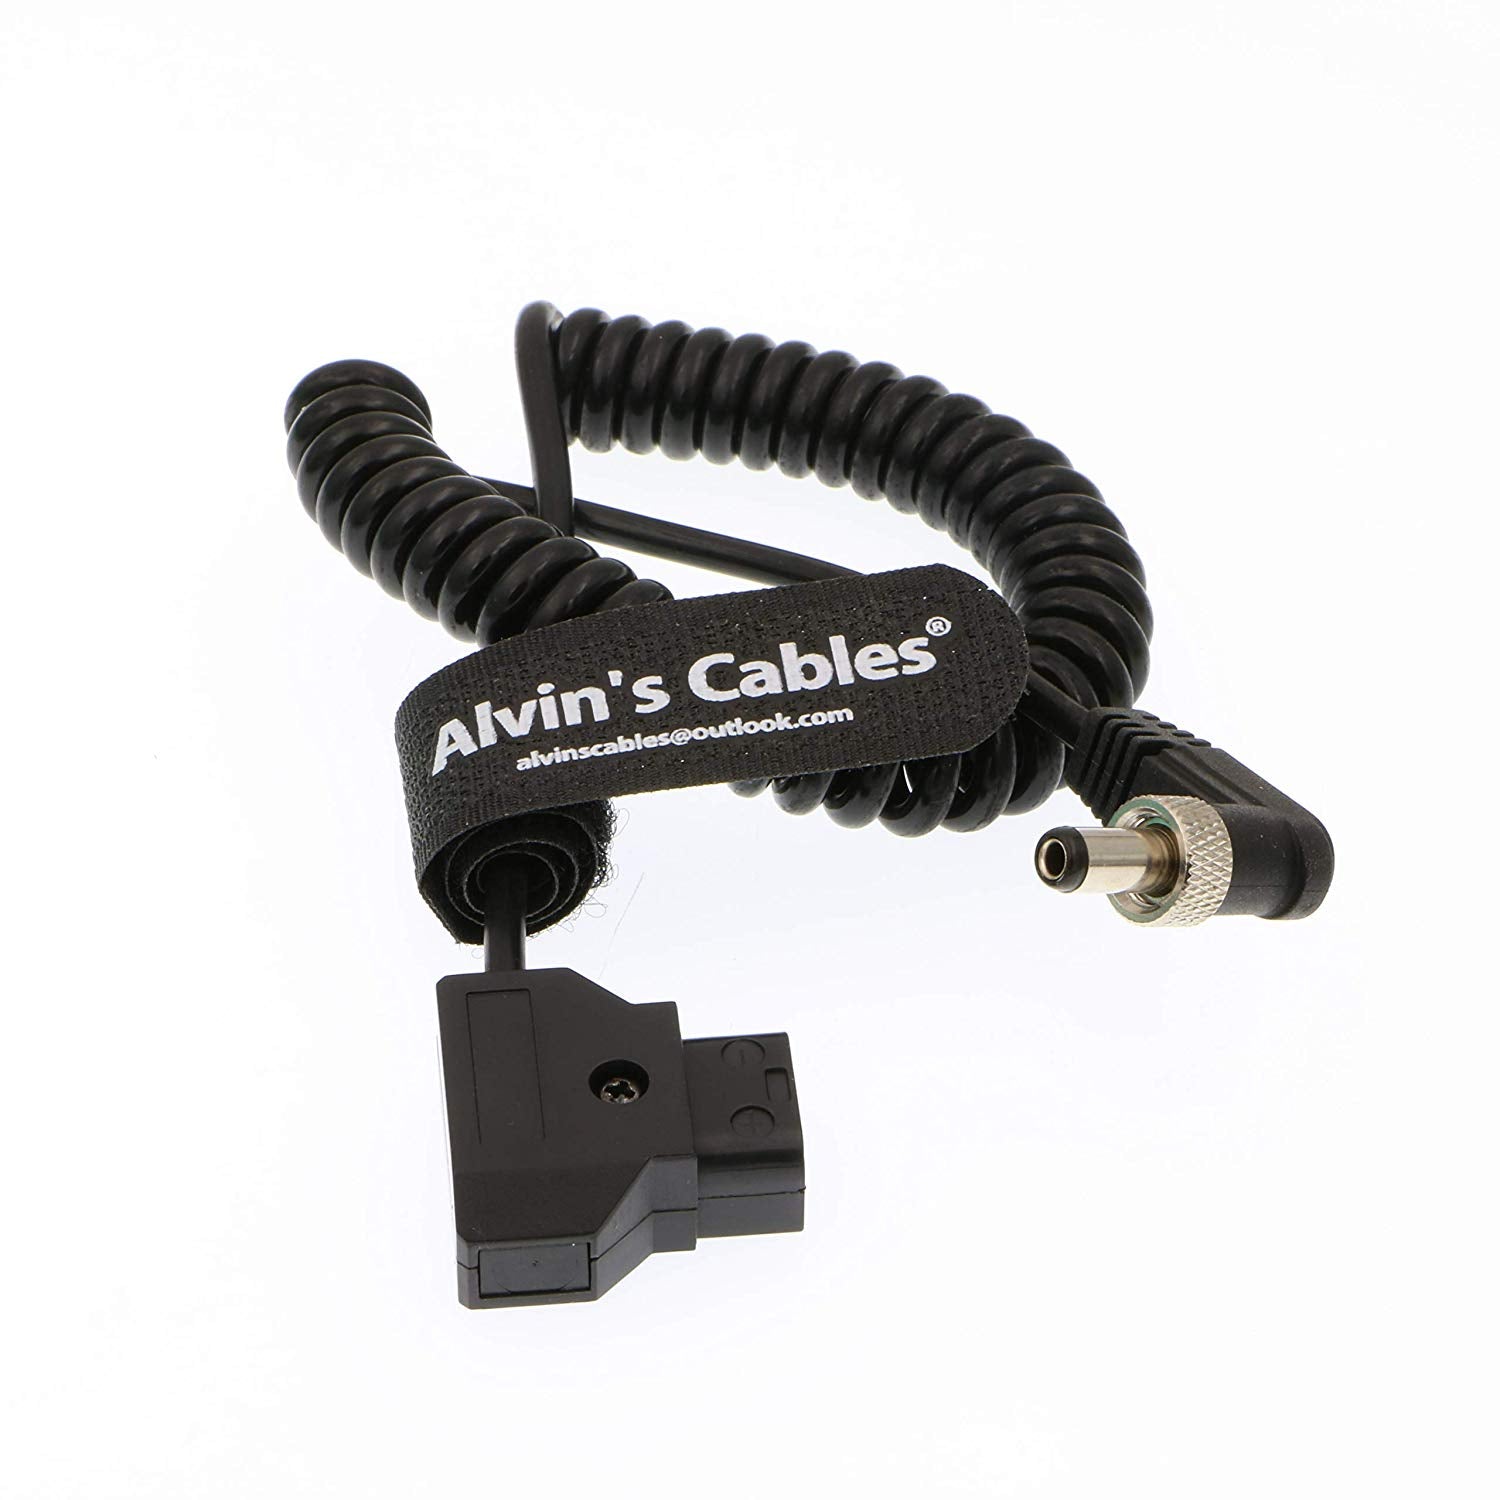 Alvin's Cables Locking DC 5.5 2.1 to D Tap Spring Power Cable for Video Devices PIX-E7 PIX-E5 7 Touchscreen Display Hollyland Mars 400s